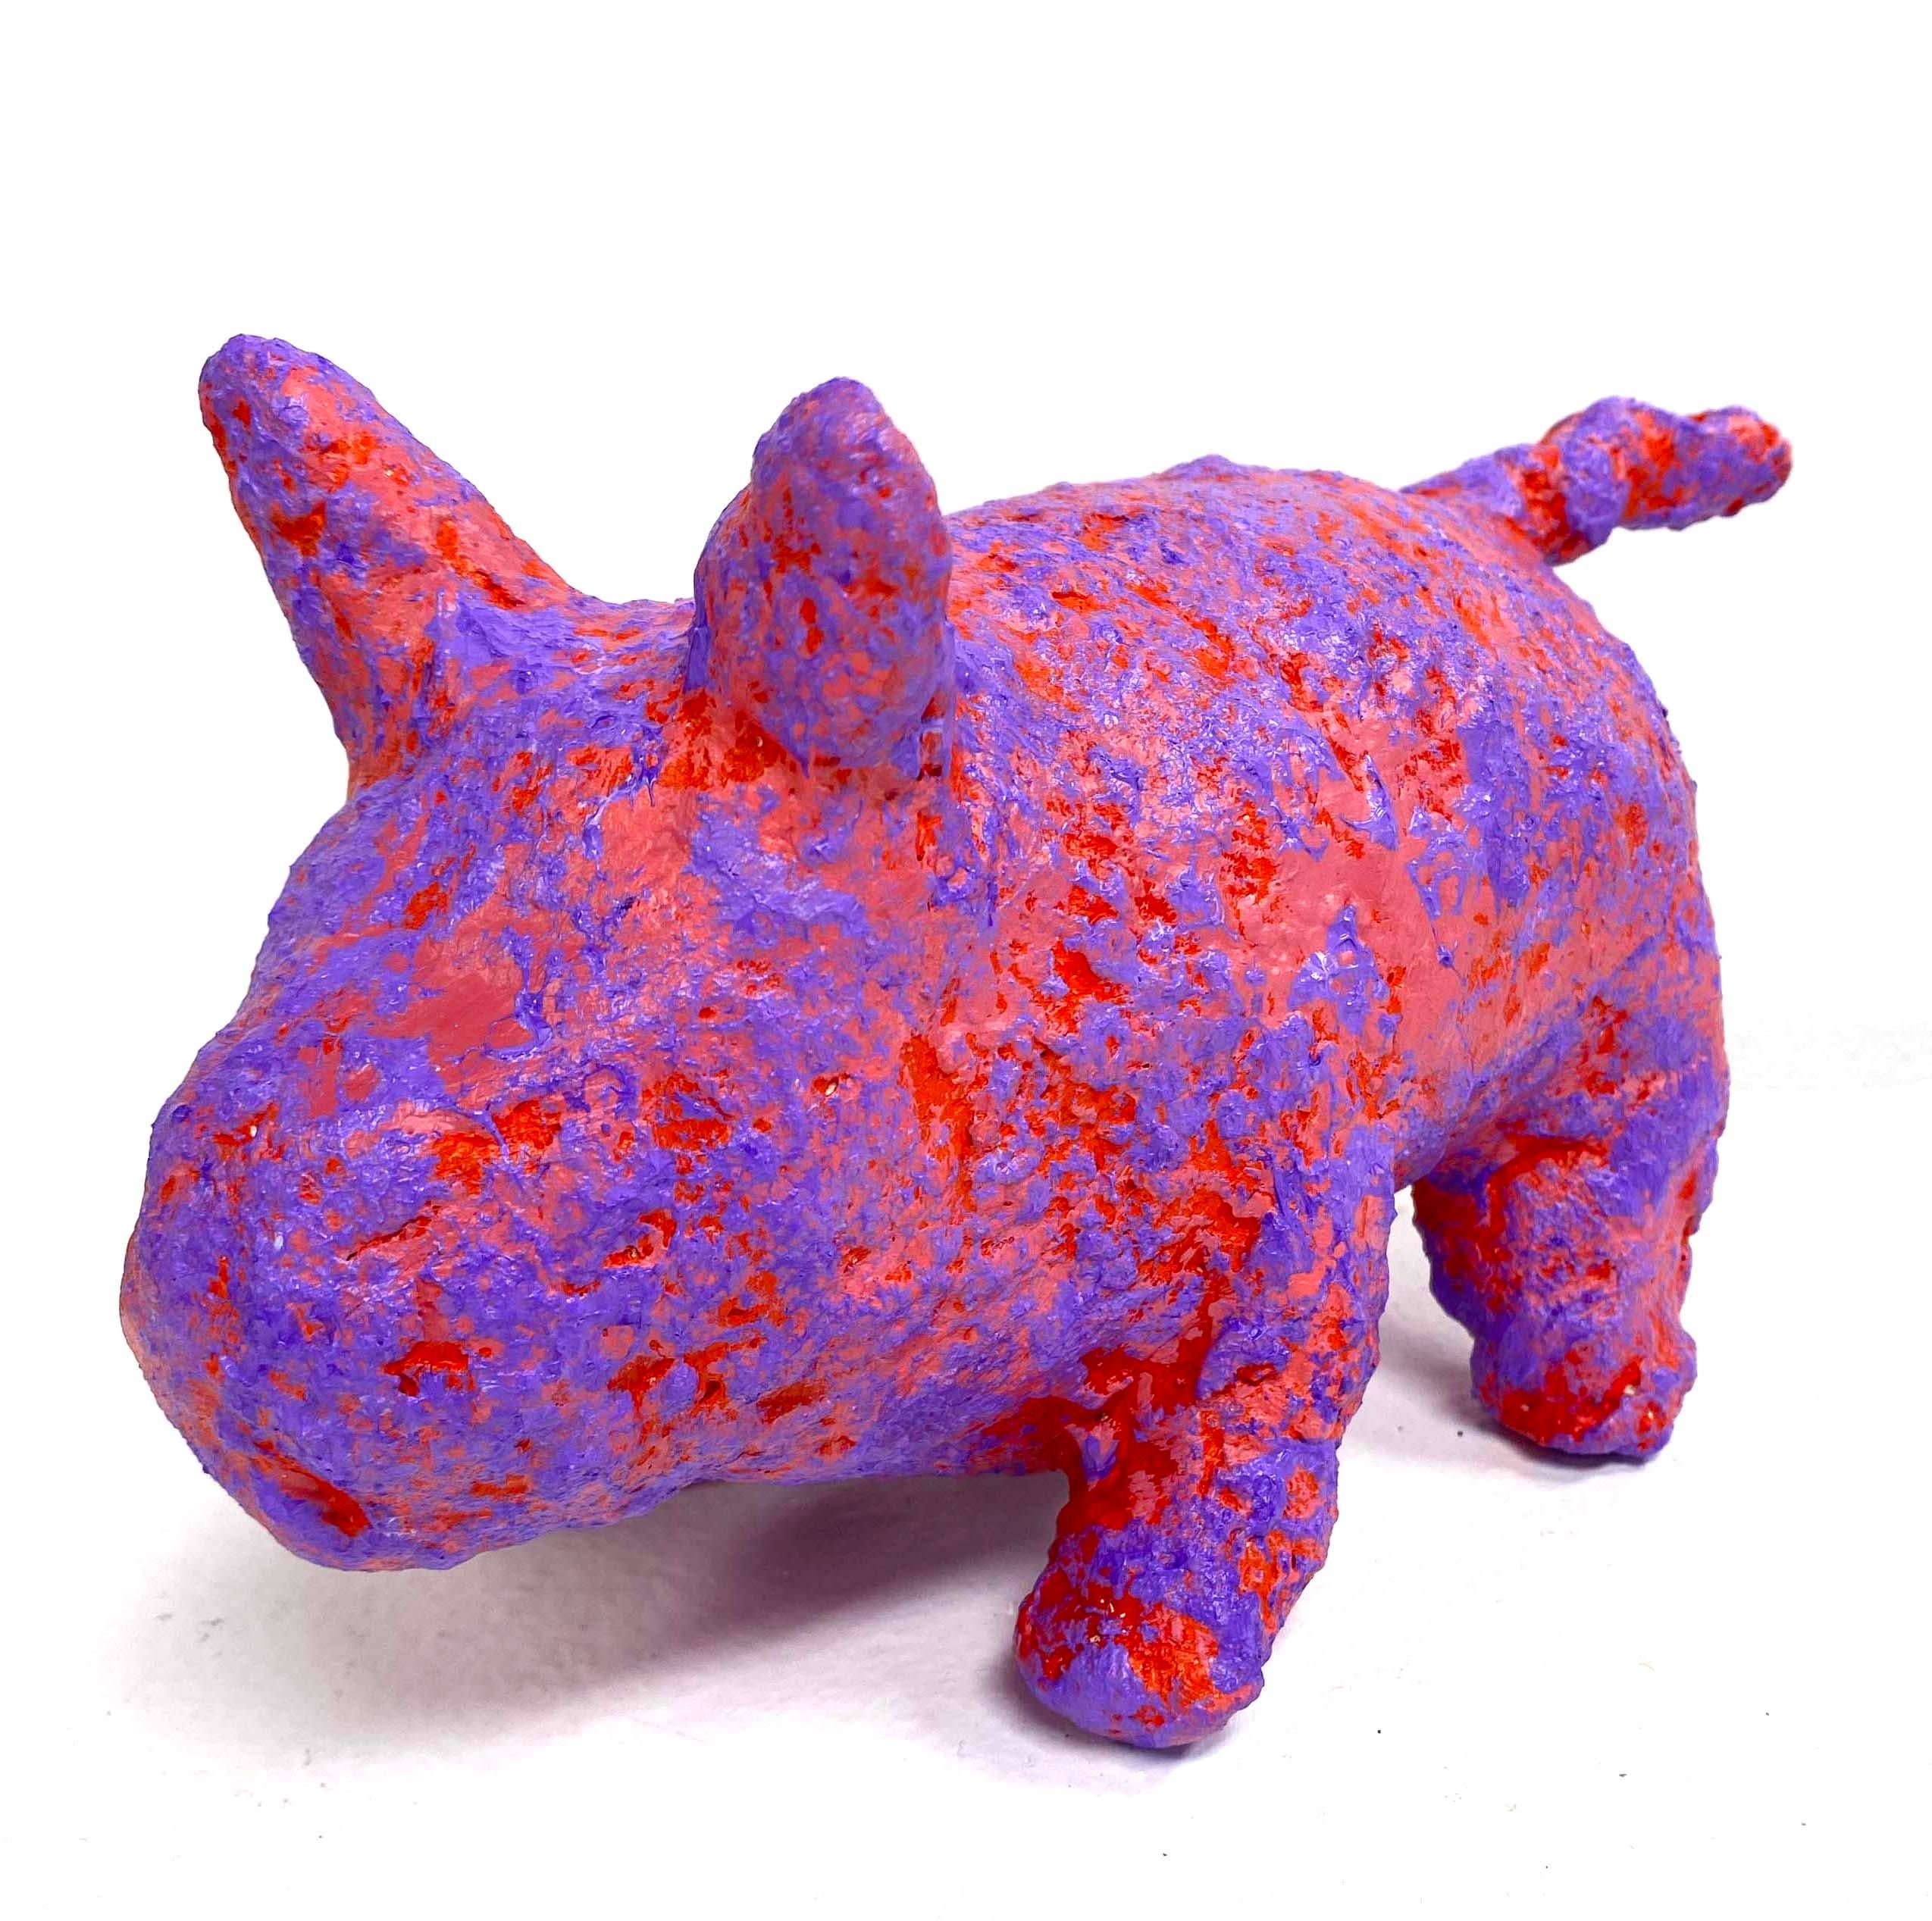 Polly Little Figurative Sculpture - Contemporary Sculpture Pig Piglet Animal Bright Red Purple Plaster Acrylic 